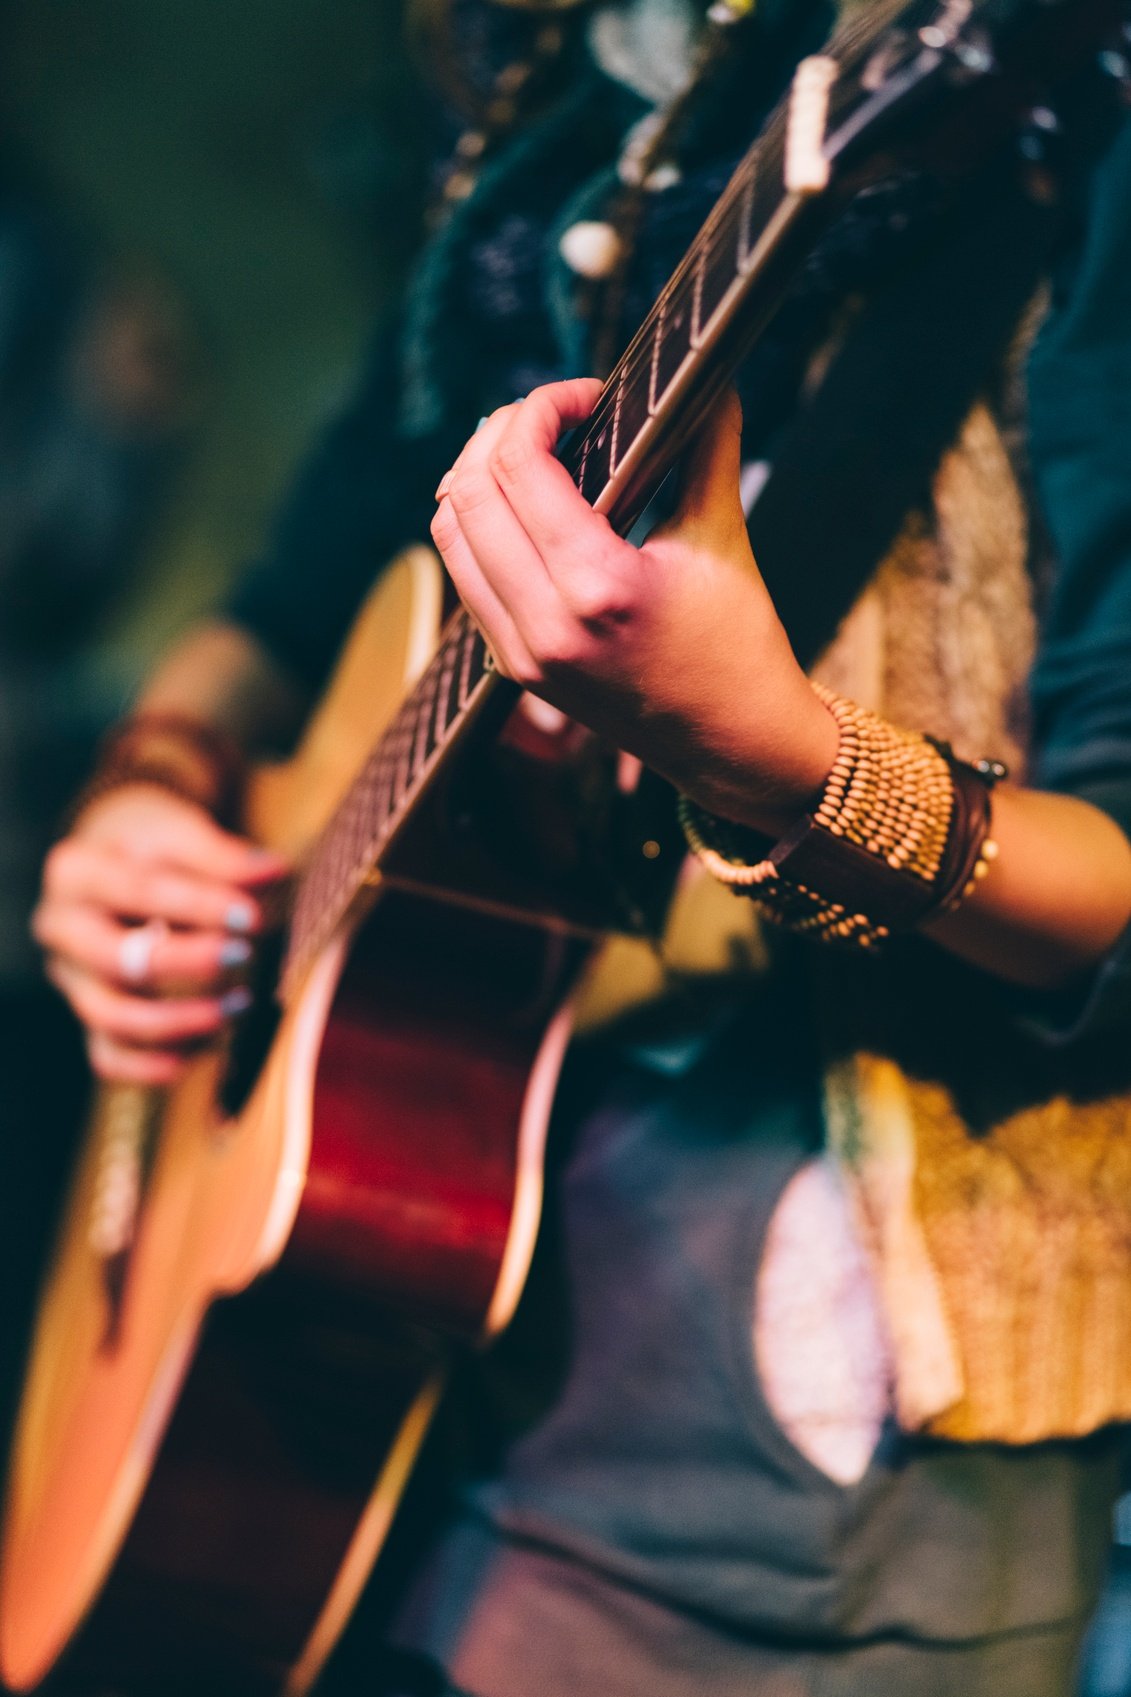 Is Musical Talent Innate or Acquired?